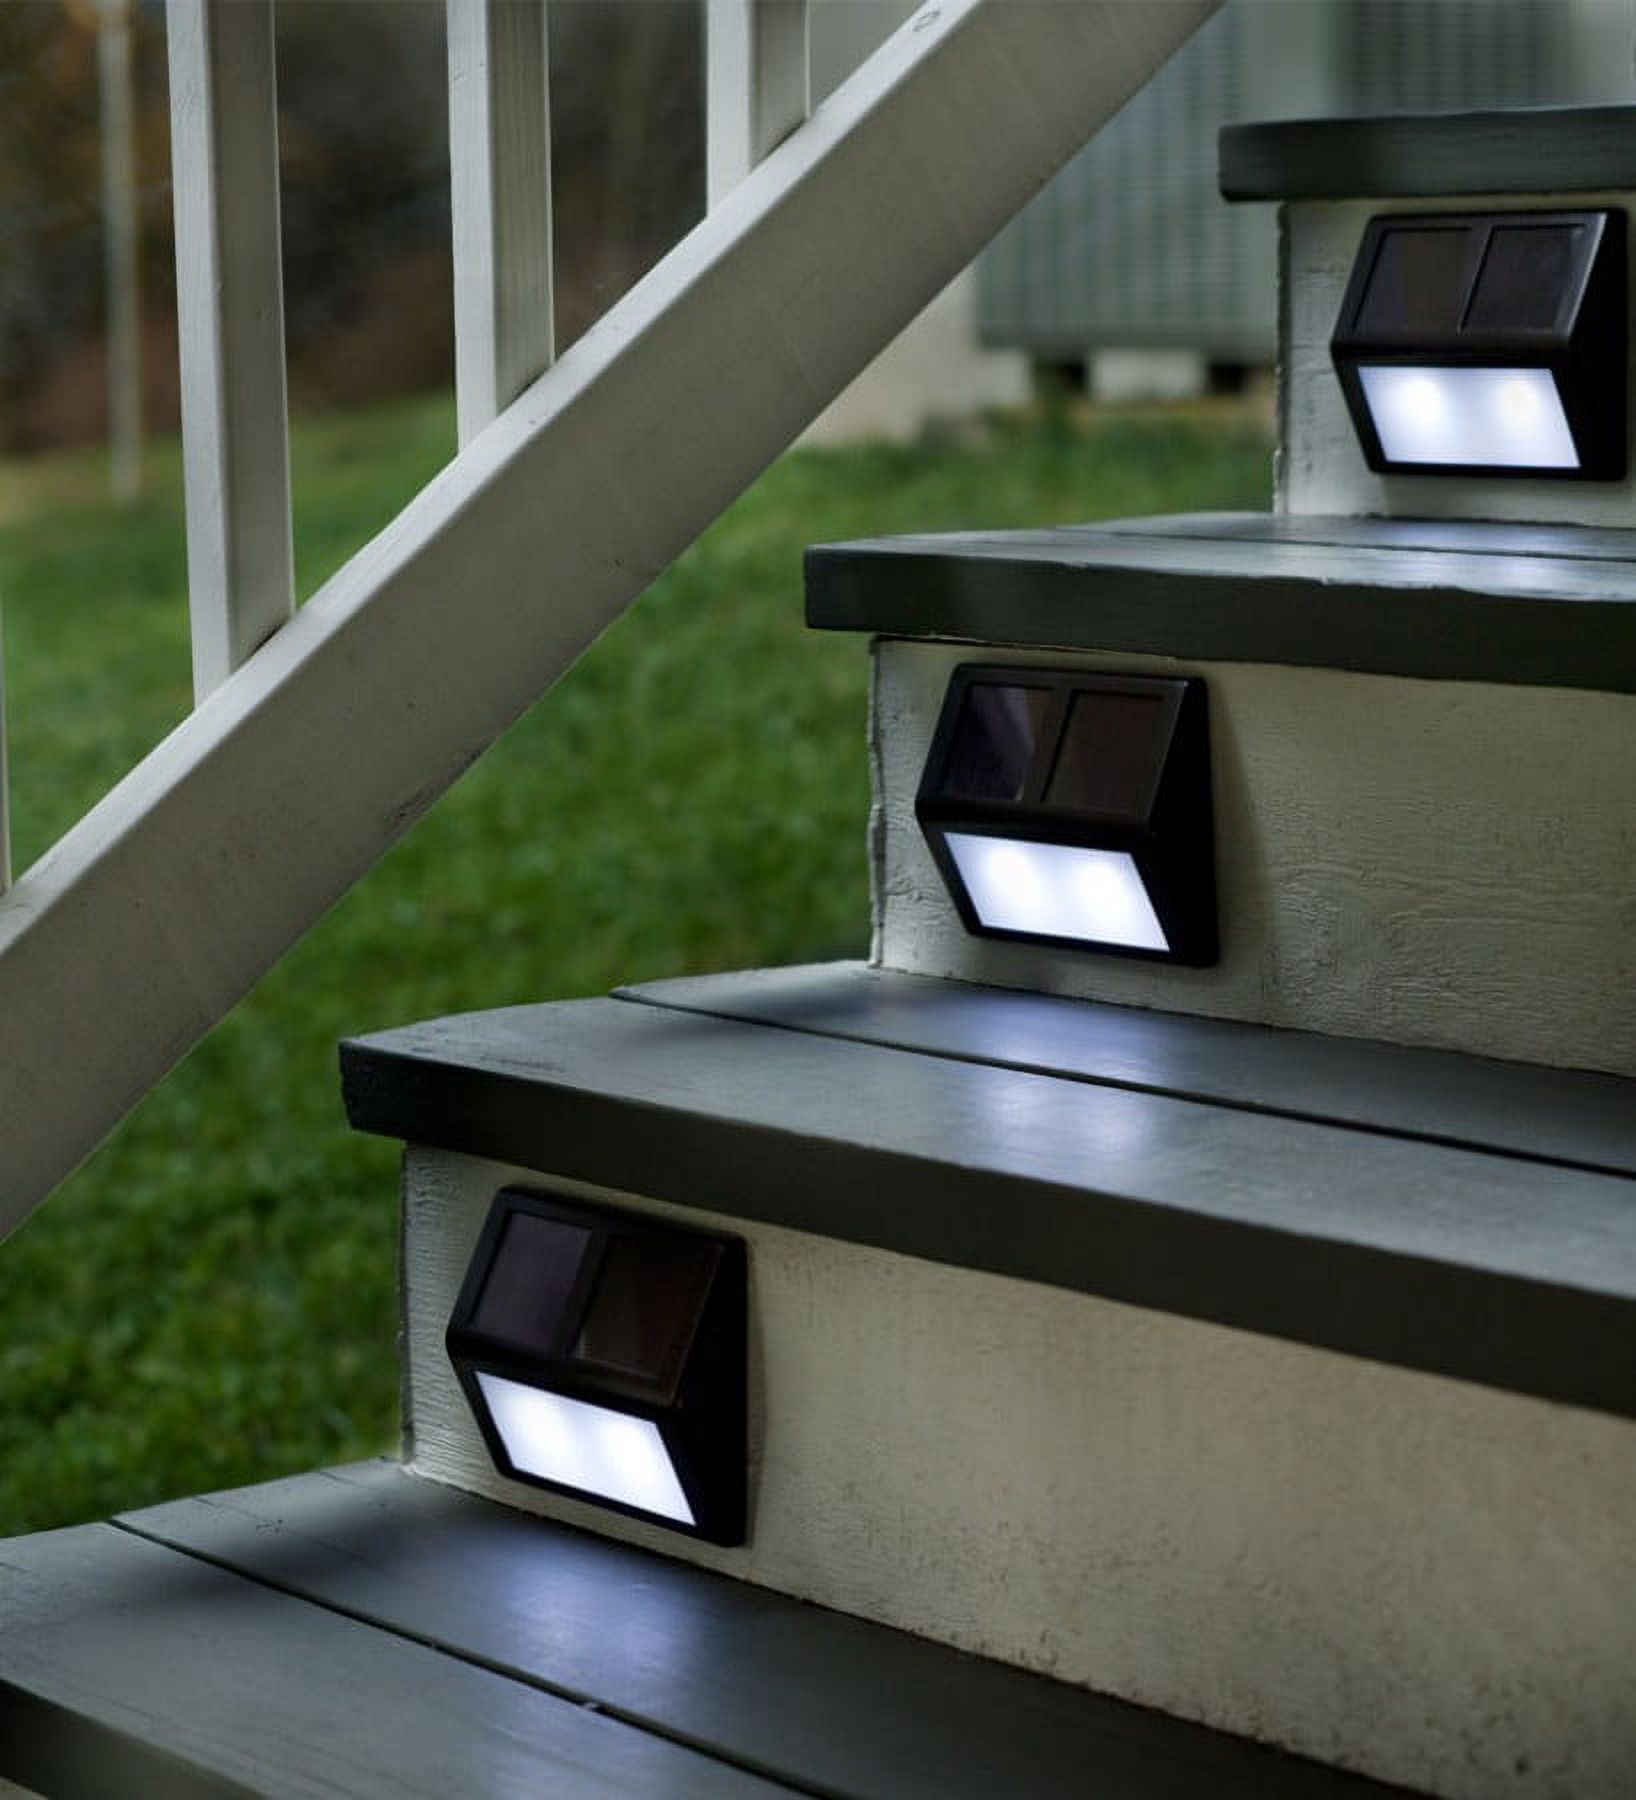 Solar Powered Durable Step Lights, Set of 4, Bronze - image 1 of 1